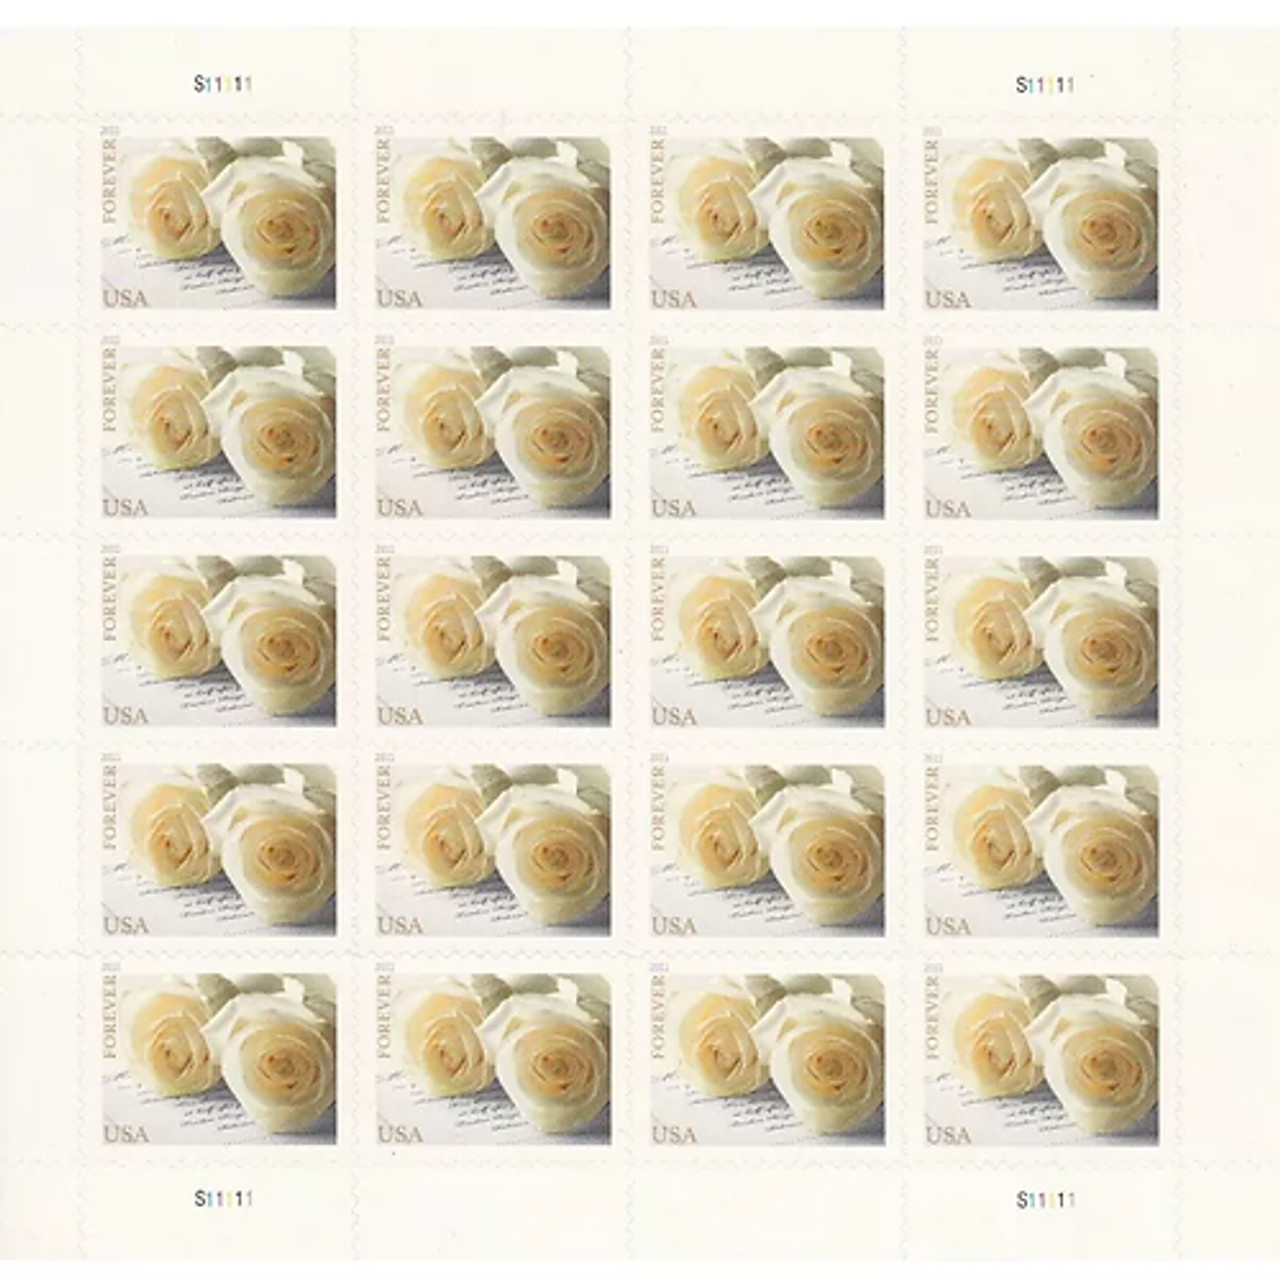 Wedding Roses 2011, Discounted Forever Stamps